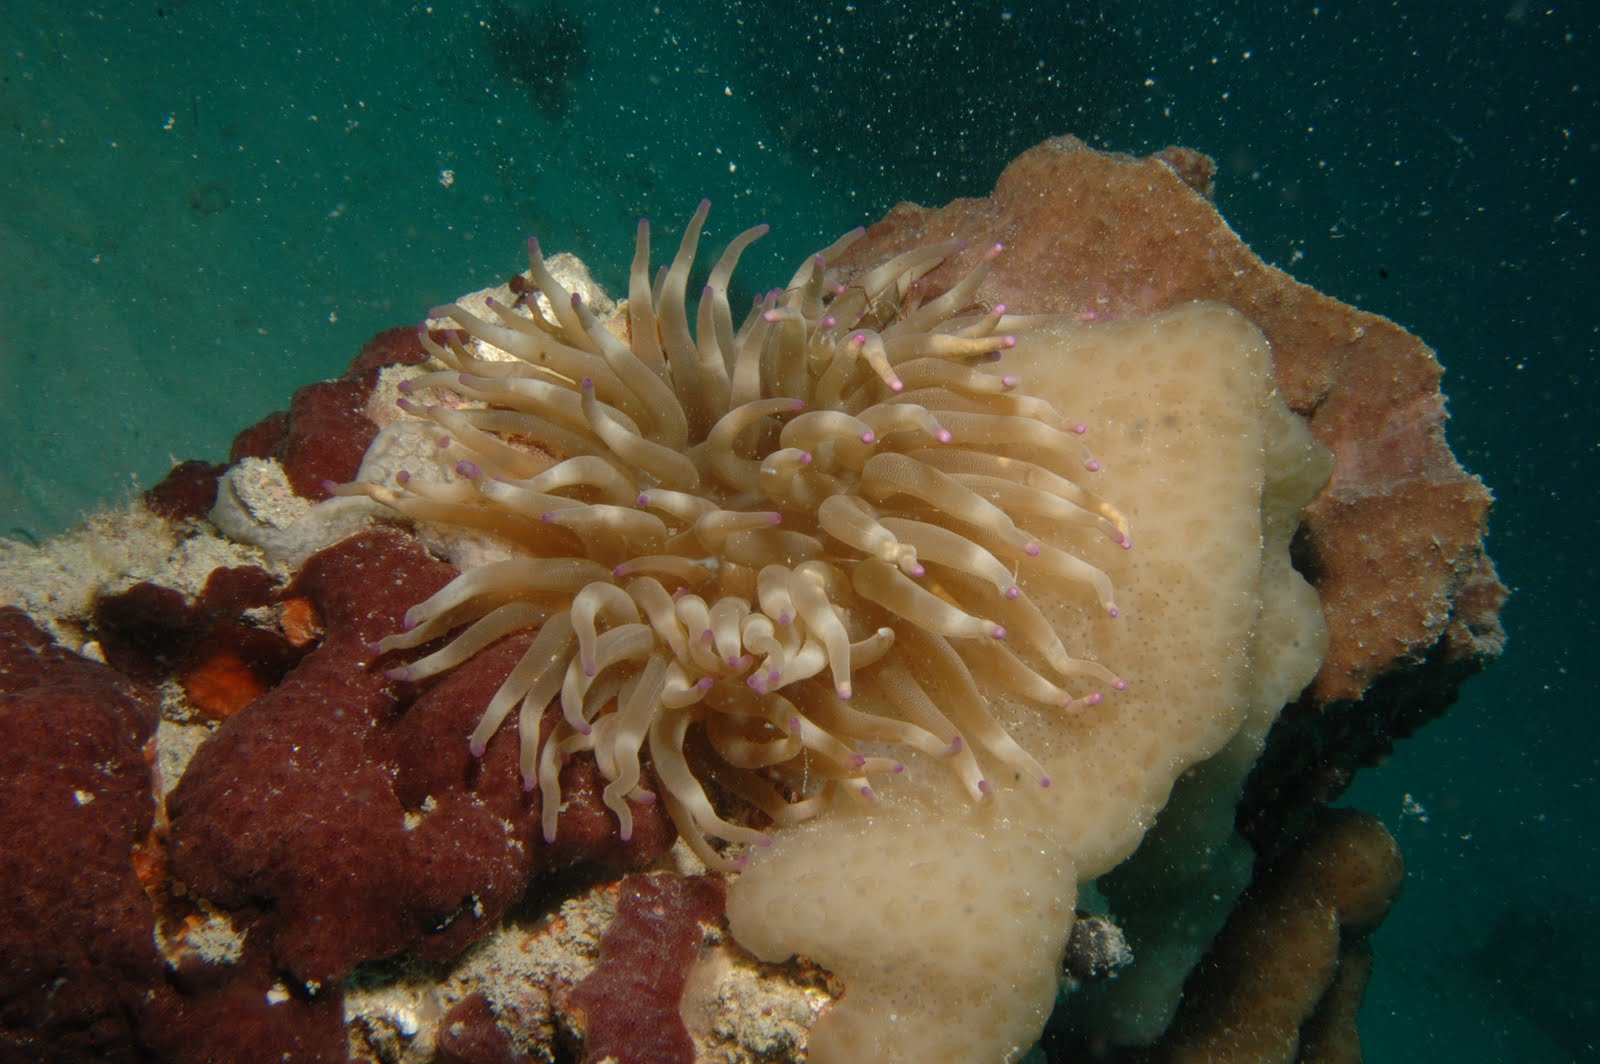 brown and white anemone and cream sponge on coral/rock outcrop